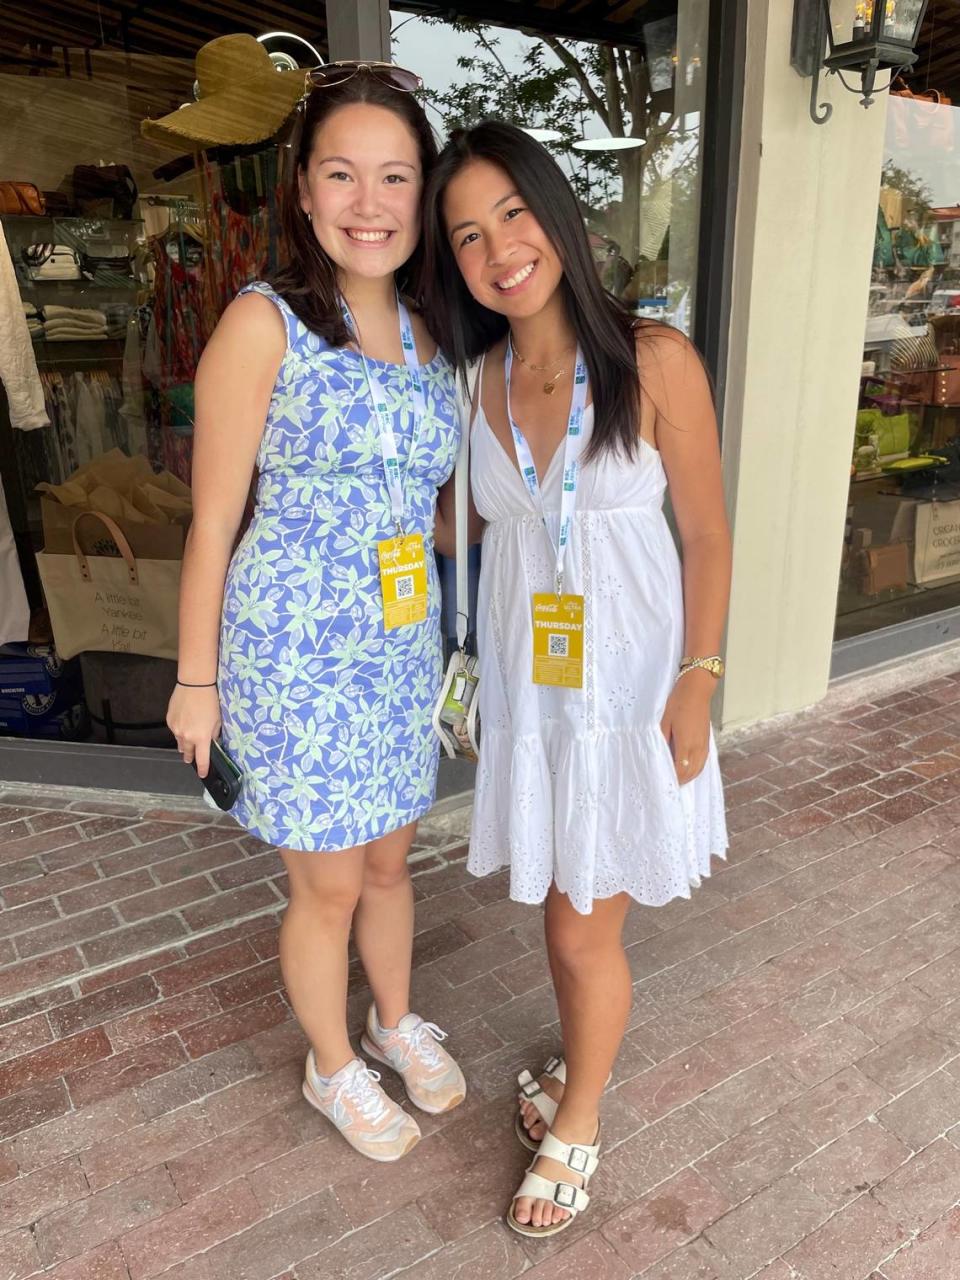 Kiwa Bertholf and Meagan Alvarez pose for a picture during the 2023 RBC Heritage golf tournament outside of Radiance boutique in Harbour Town.